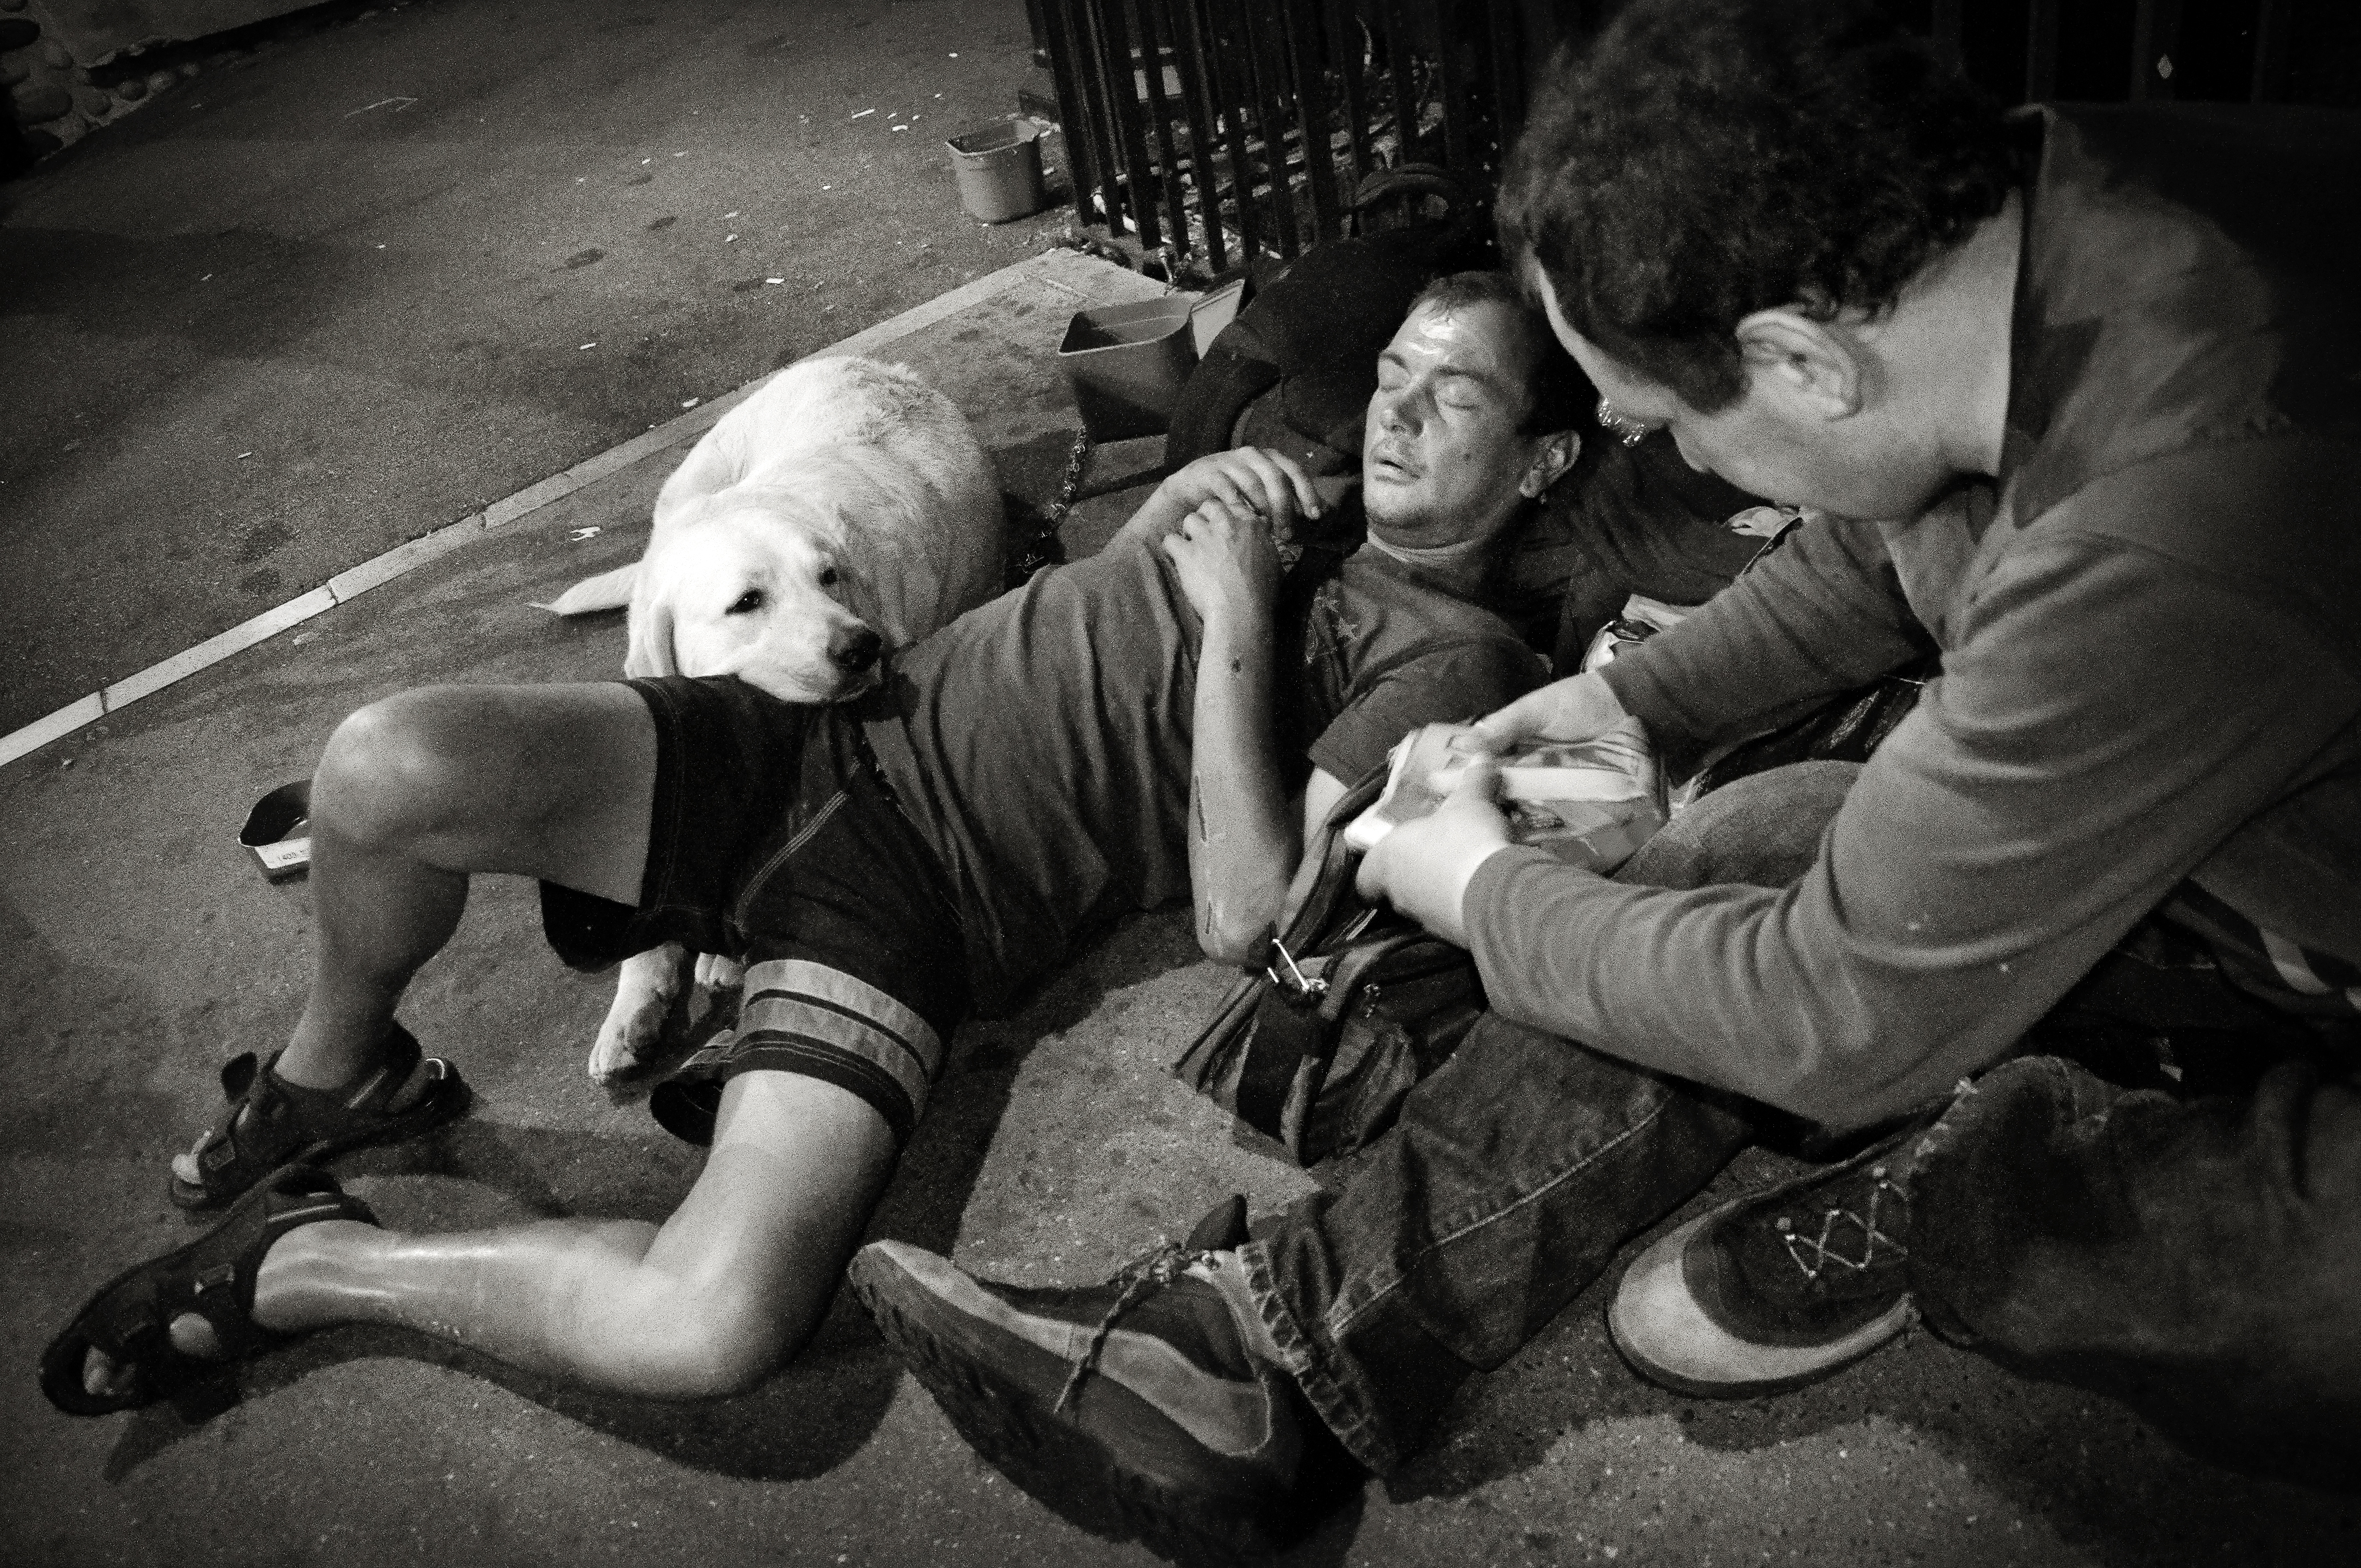 Homeless men with dog photo